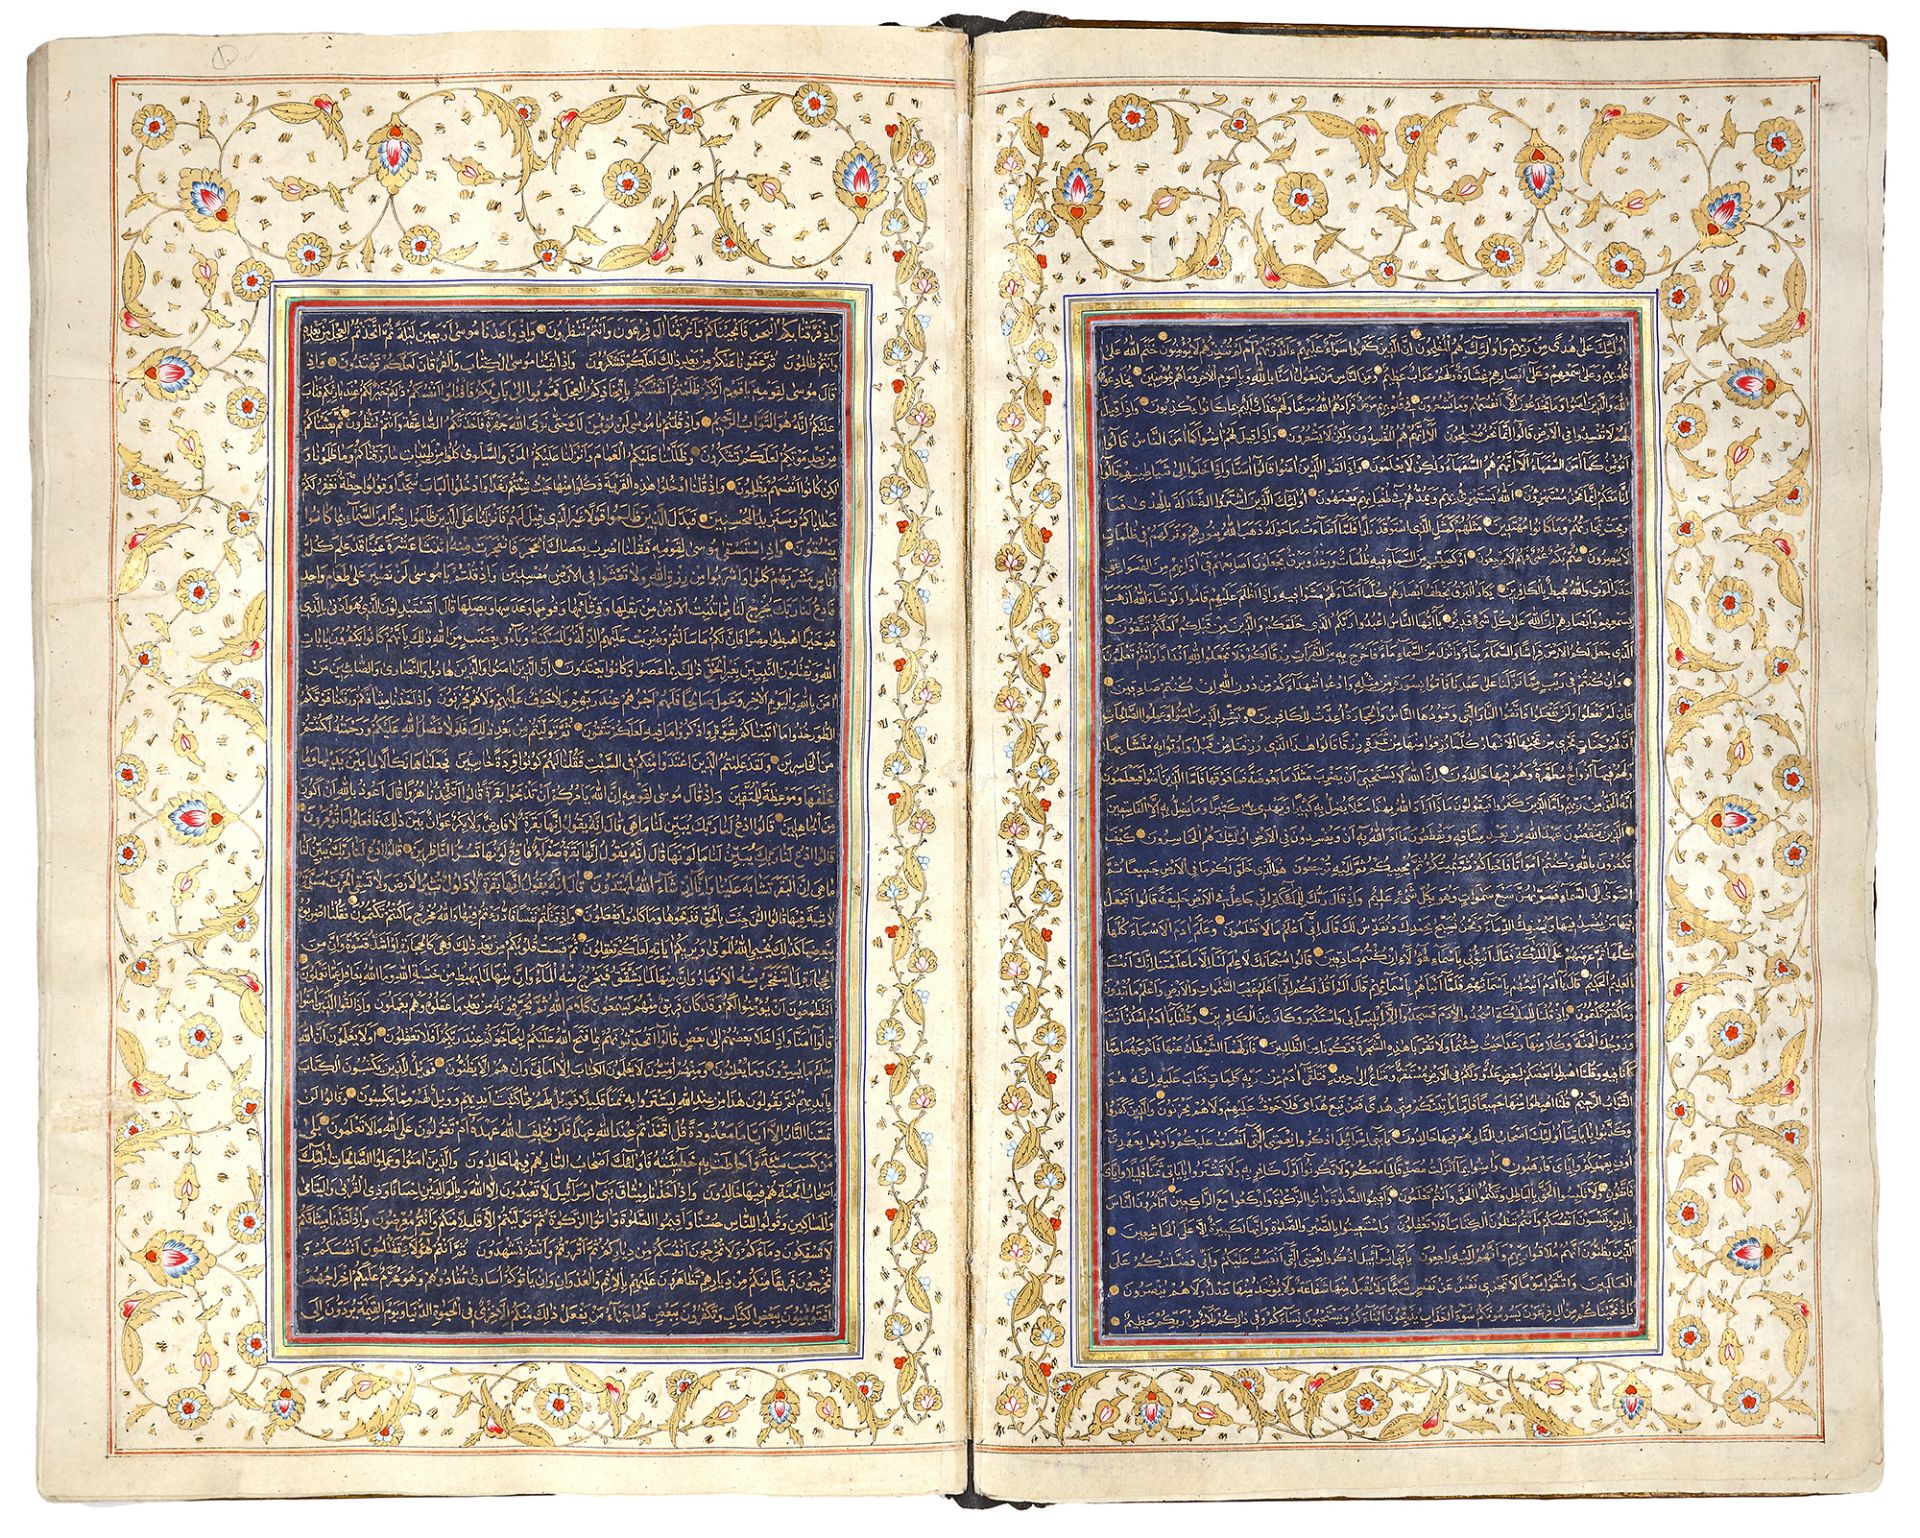 AN ILLUMINATED QURAN, PERSIA, LATE 19TH-EARLY 20TH CENTURY - Image 15 of 27